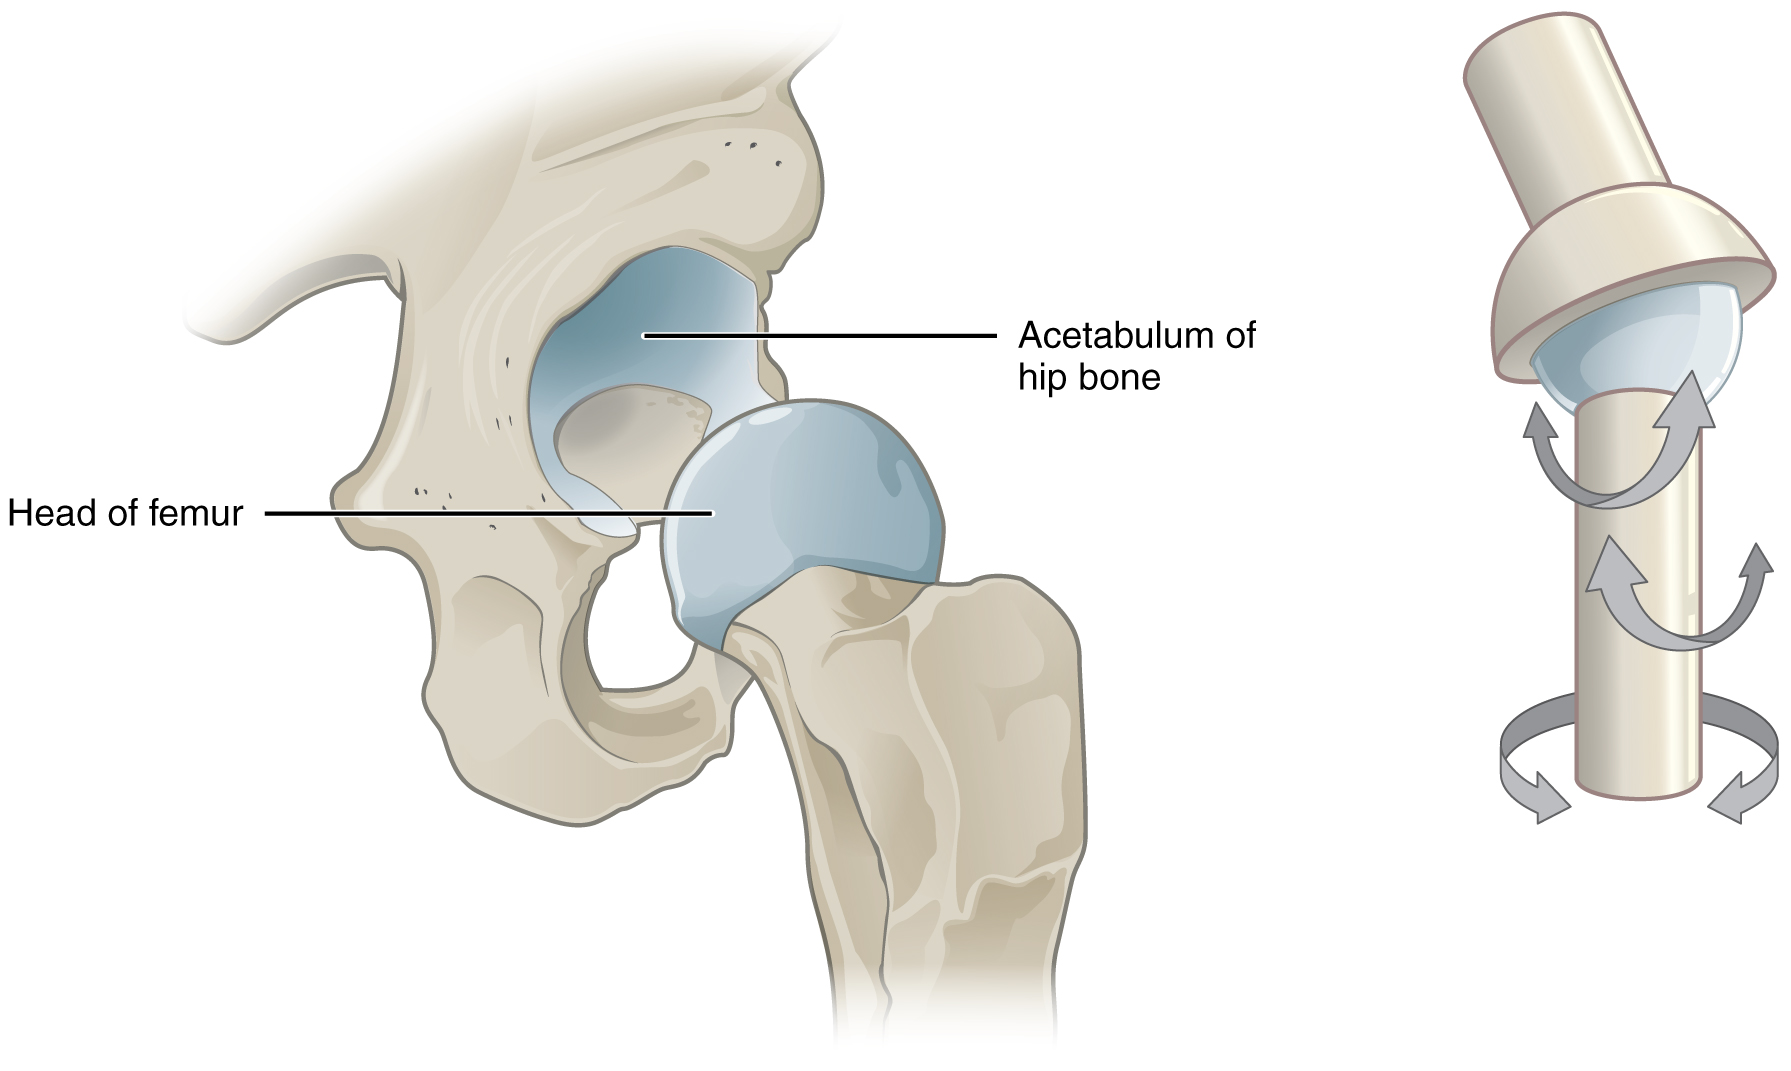 This image shows a multiaxial joint. The left panel shows the acetabulum of the hip bone and the head of the femur. The right panel shows a simplified ball-and-socket joint structure to illustrate the movement of the hip joint.